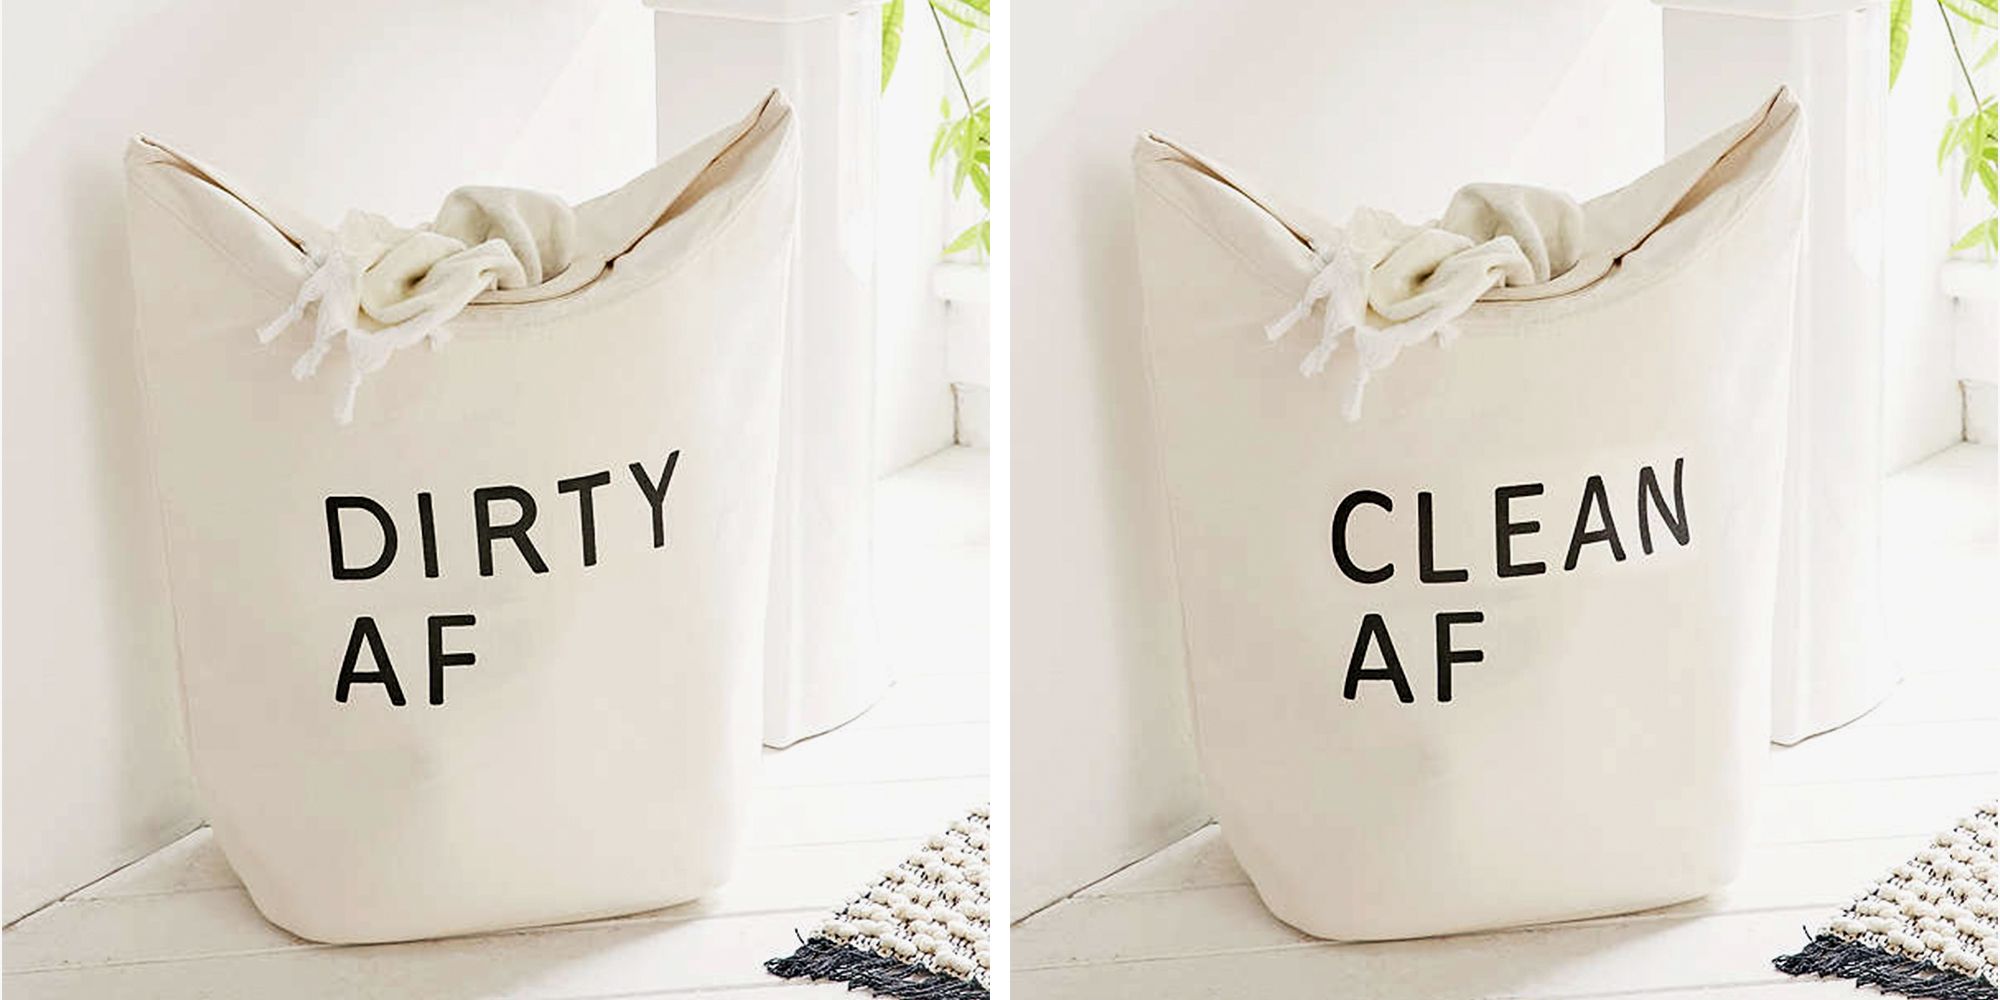 11 Best Laundry Bags and Hampers in 2018 - Cute Cotton and Hanging Laundry  Bags